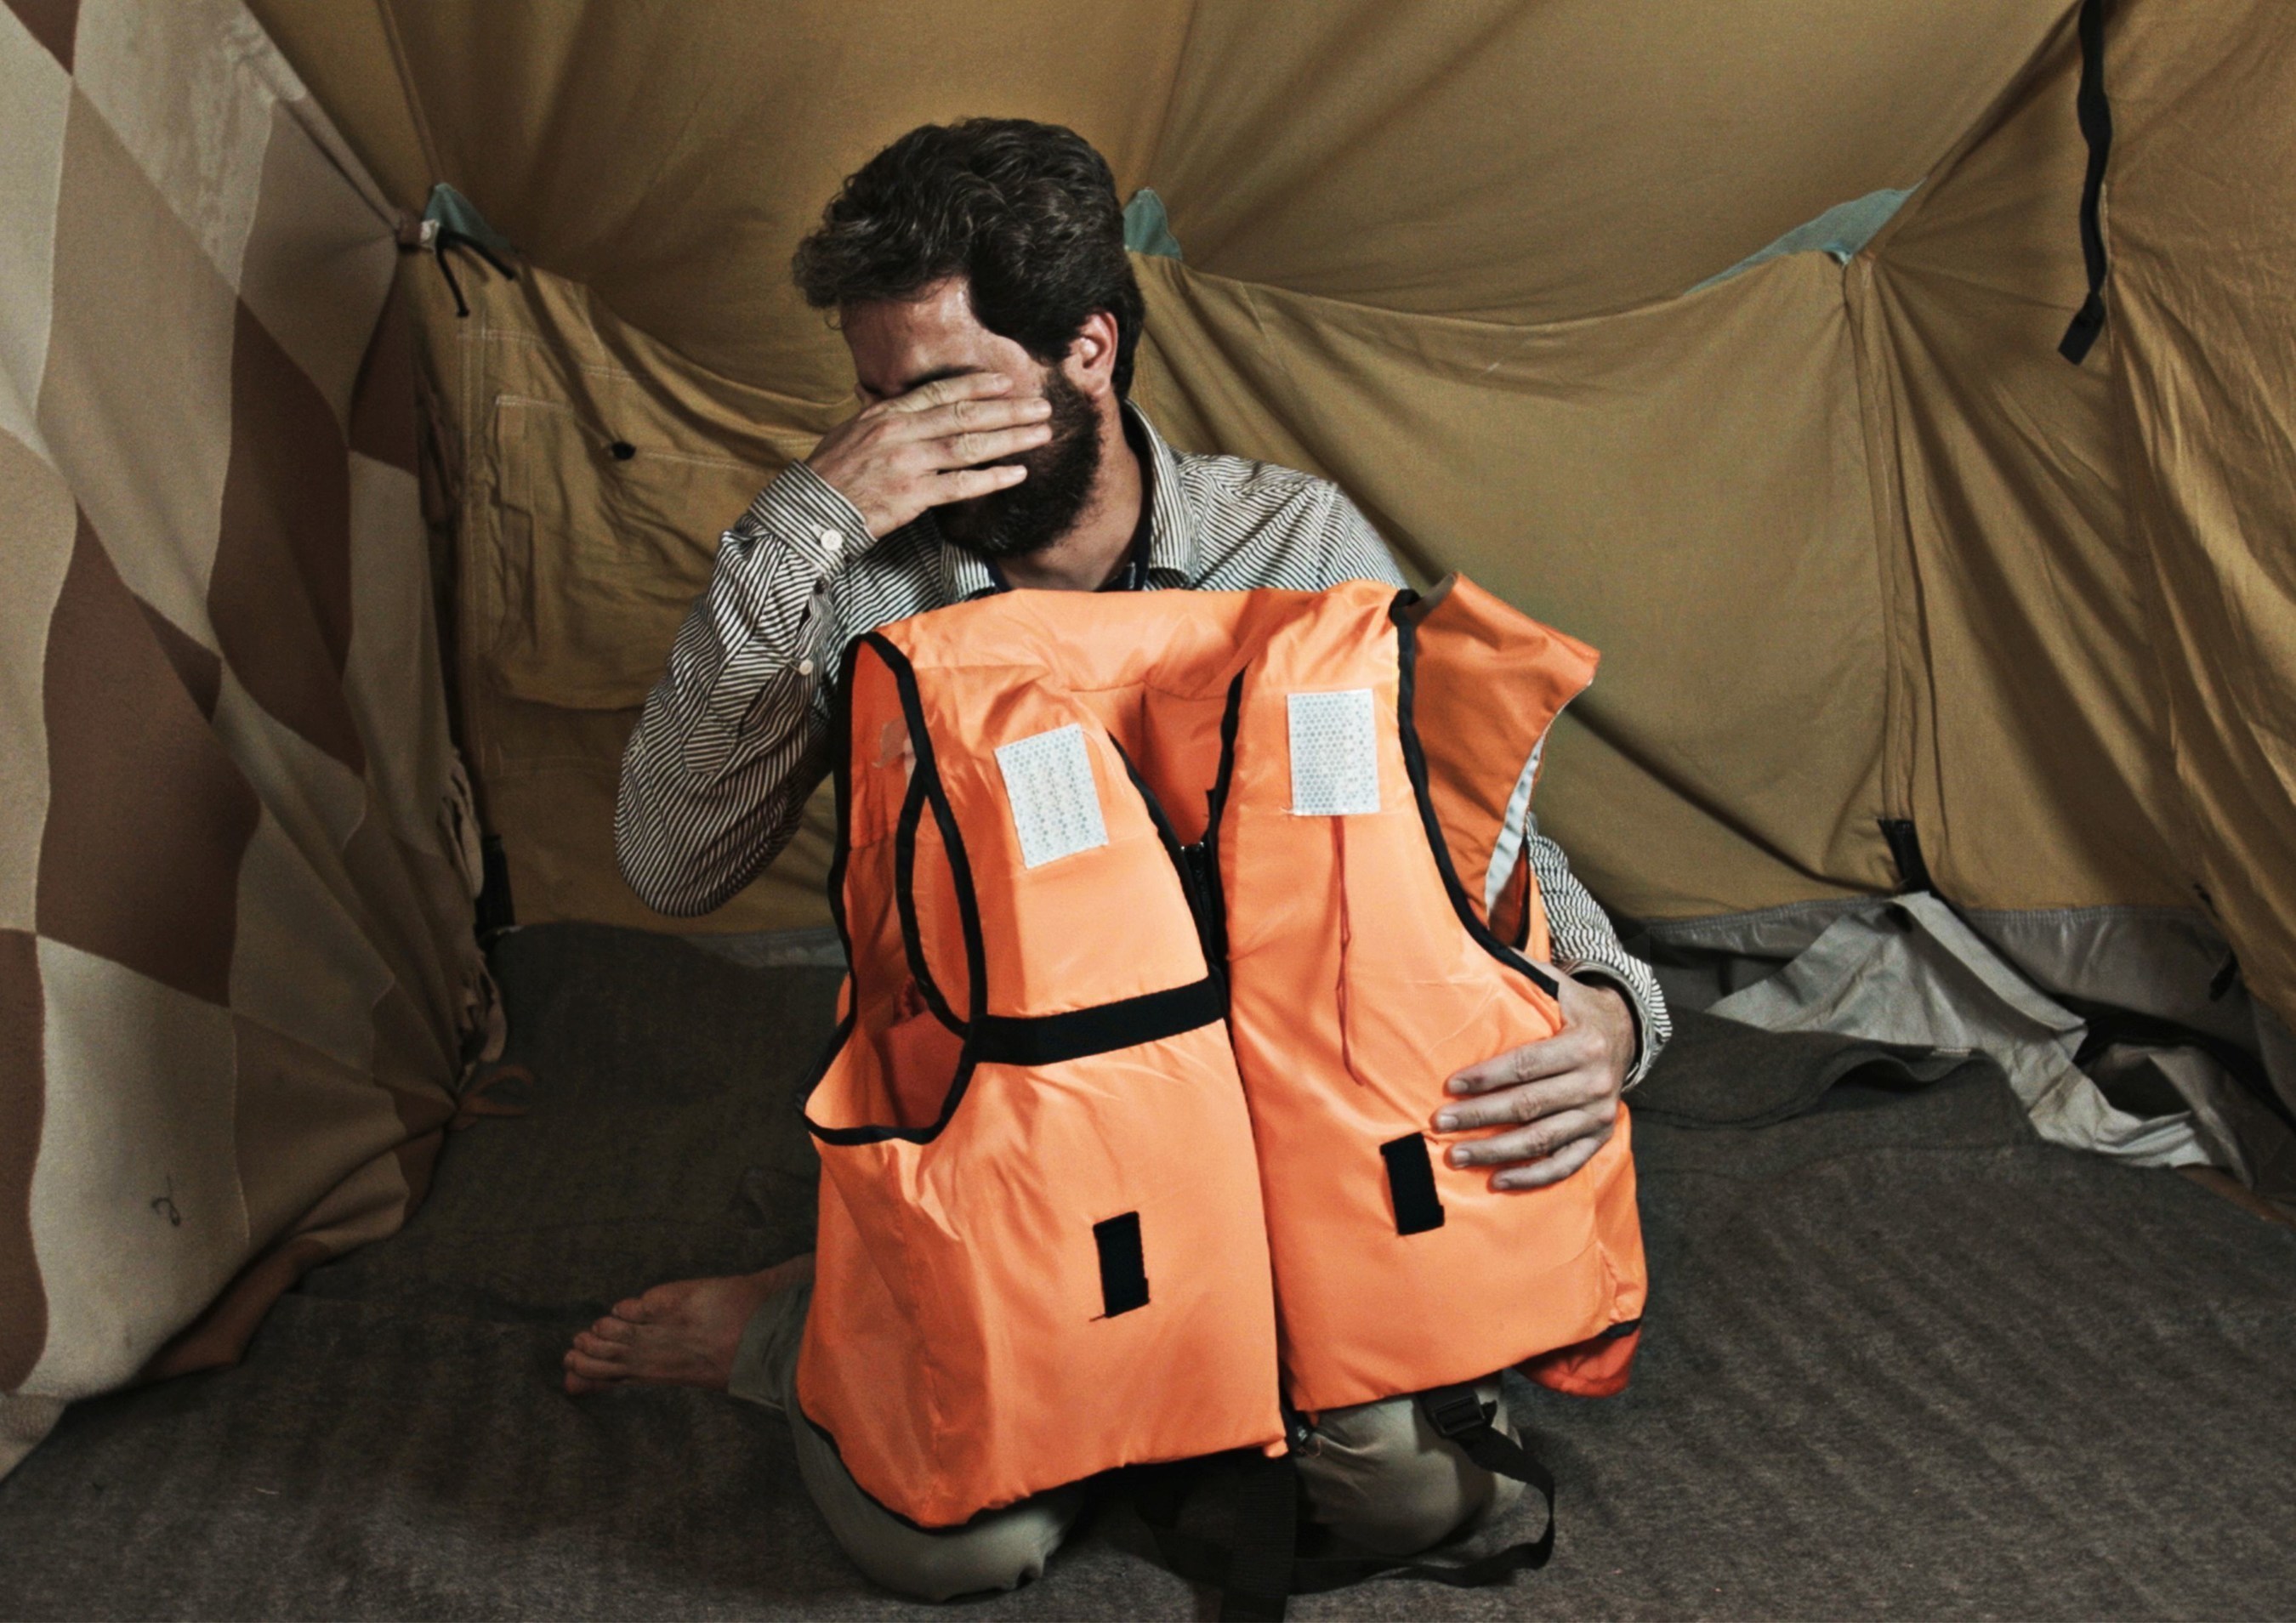 32 year old Ismail Nerabani from Hums, Syria reacting to the life jacket bearing his life story, as he sees it for the first time. The French teacher is temporarily staying in the refugee camp "Oreokastro" in Thessaloniki, Greece. In October 2016, as part of "Project Life Jacket", the life stories of nine Syrian refugees were illustrated on life jackets used for the crossing to Lesbos.
Picture taken on the 7th October 2016 in Thessaloniki. (Project Life Jacket). (PRNewsFoto/Project Life Jacket)